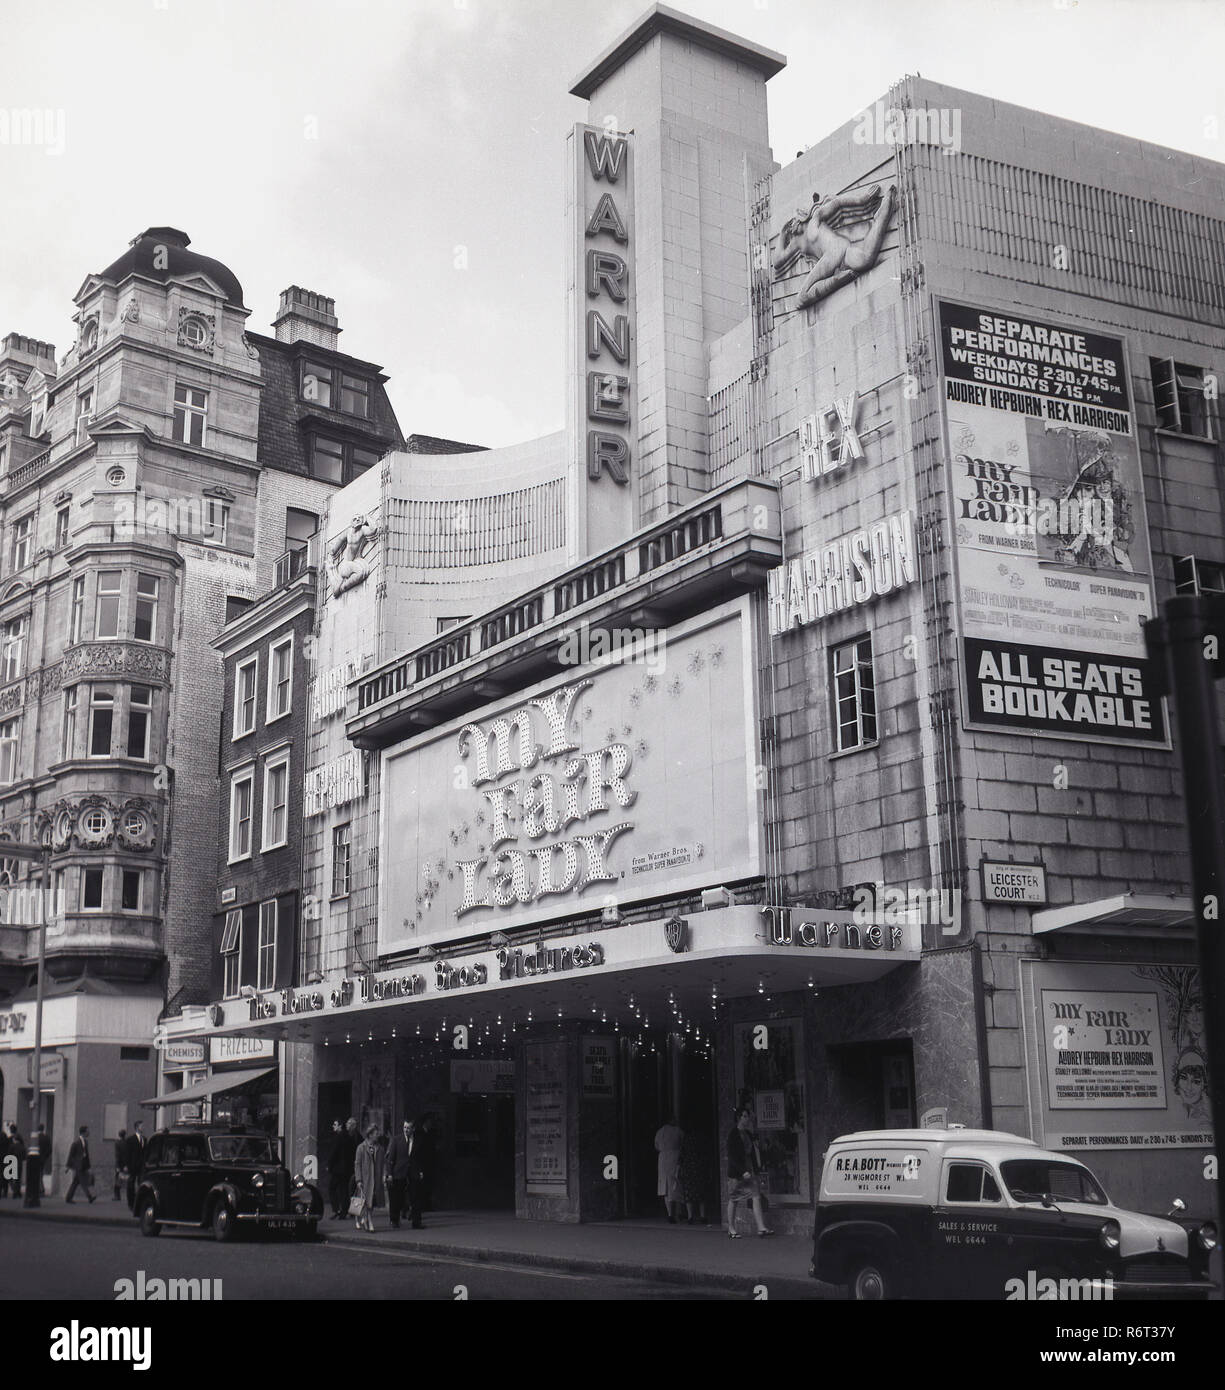 1964, the film 'My fair Lady' by Warner Bros., staring Audrey Hepburn and Rex Harrison being shown at the Warner Cinema, Leicester Court, Westminster, London, WC2. The american musical film was adapted from the famous Lerner and Loewe stage musical which itself was based on the 1913 stage play 'Pygmalion' by George Bernard Shaw. It was the estimated to be the most expensive film shot in the US up to that time, with a budget of $17 million. Stock Photo